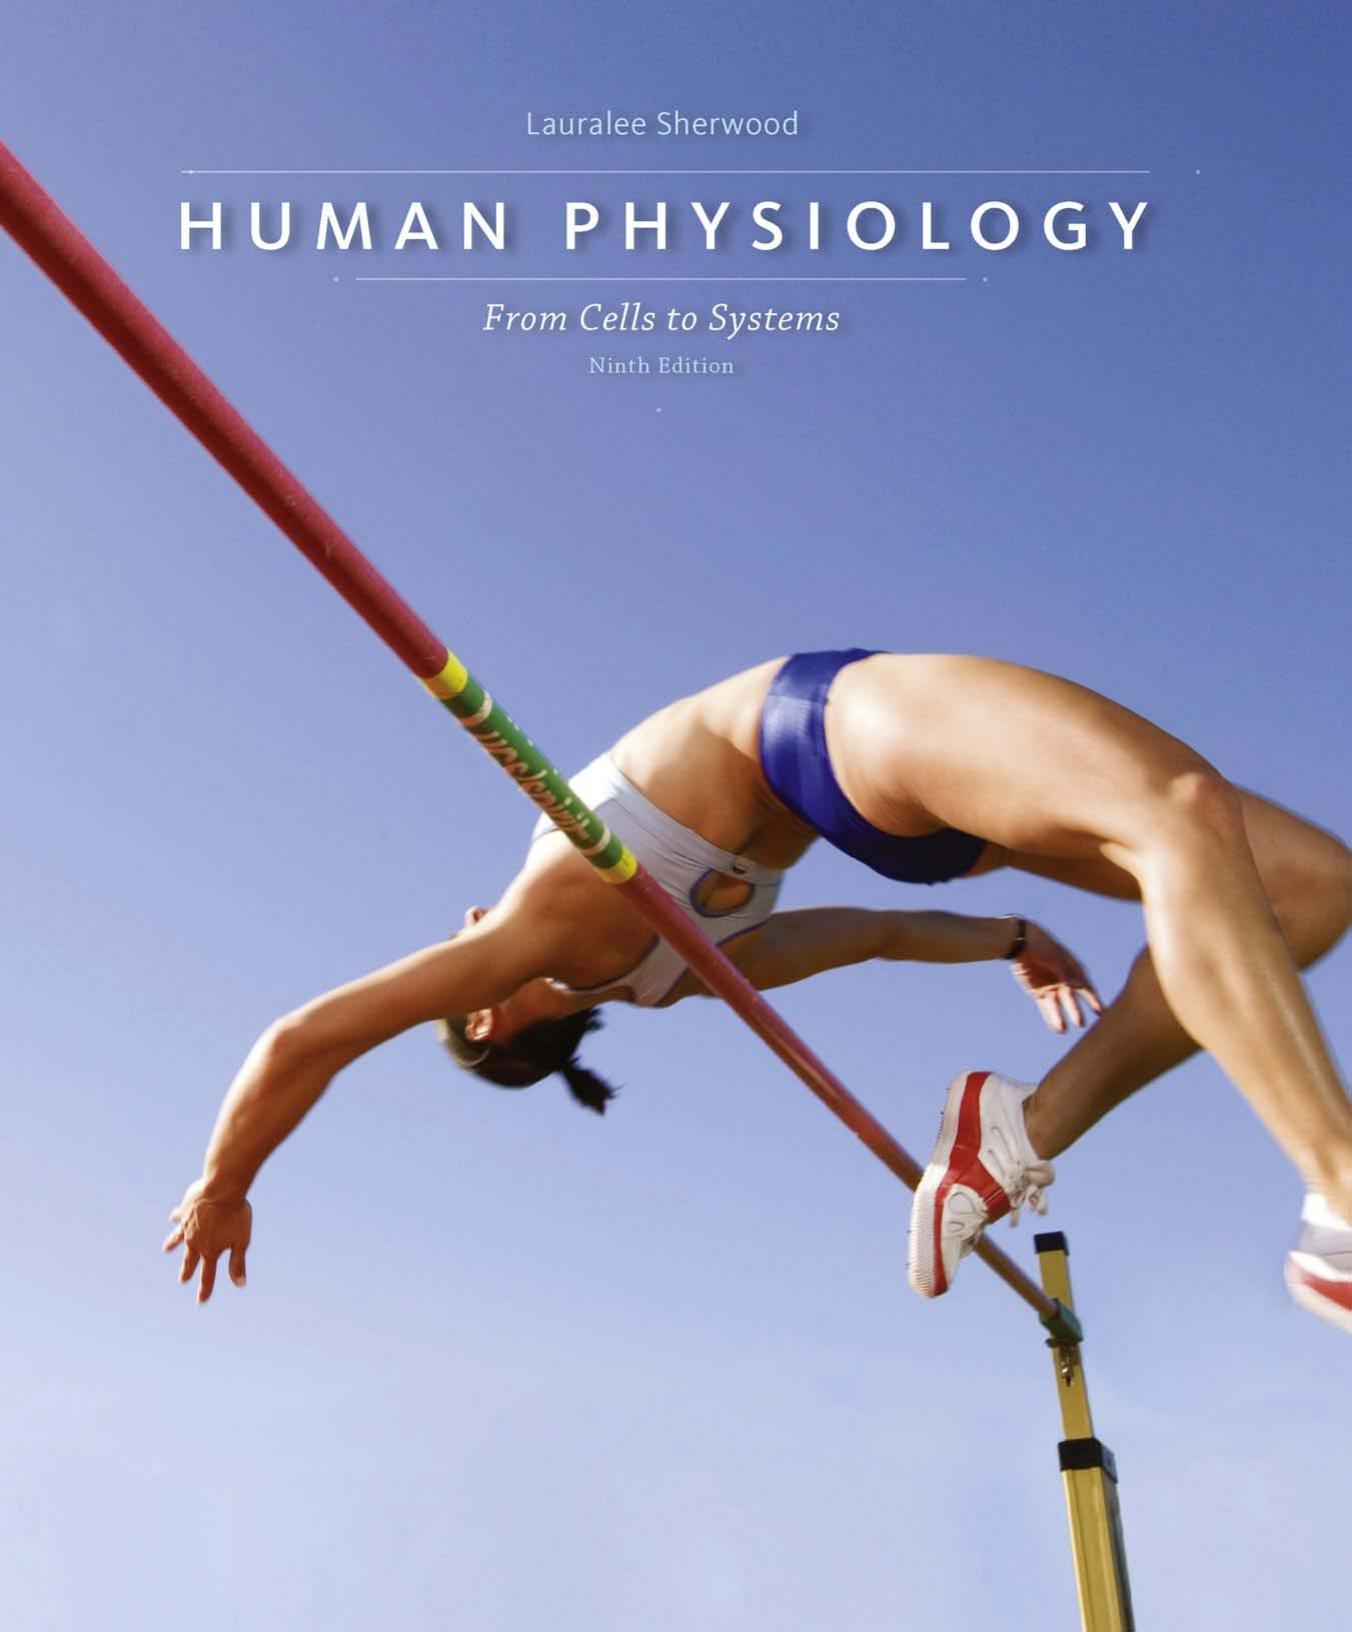 Human Physiology From Cells to Systems 9th ed. 2006.pdf